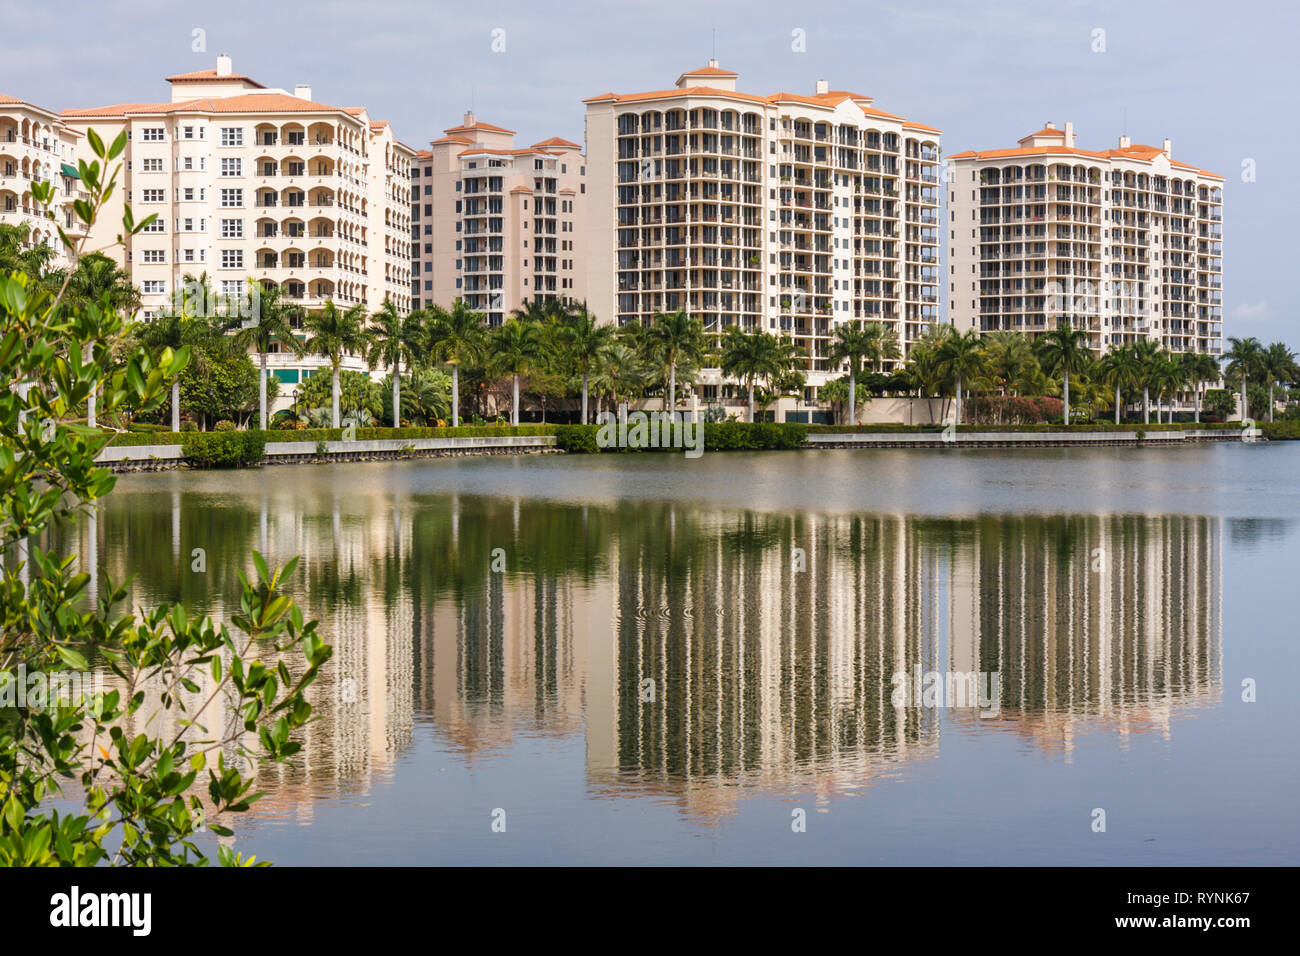 Miami Florida,Coral Gables,Deering Bay Yacht & Country Club,building,luxury,lifestyle,condominium residential apartment apartments building buildings Stock Photo